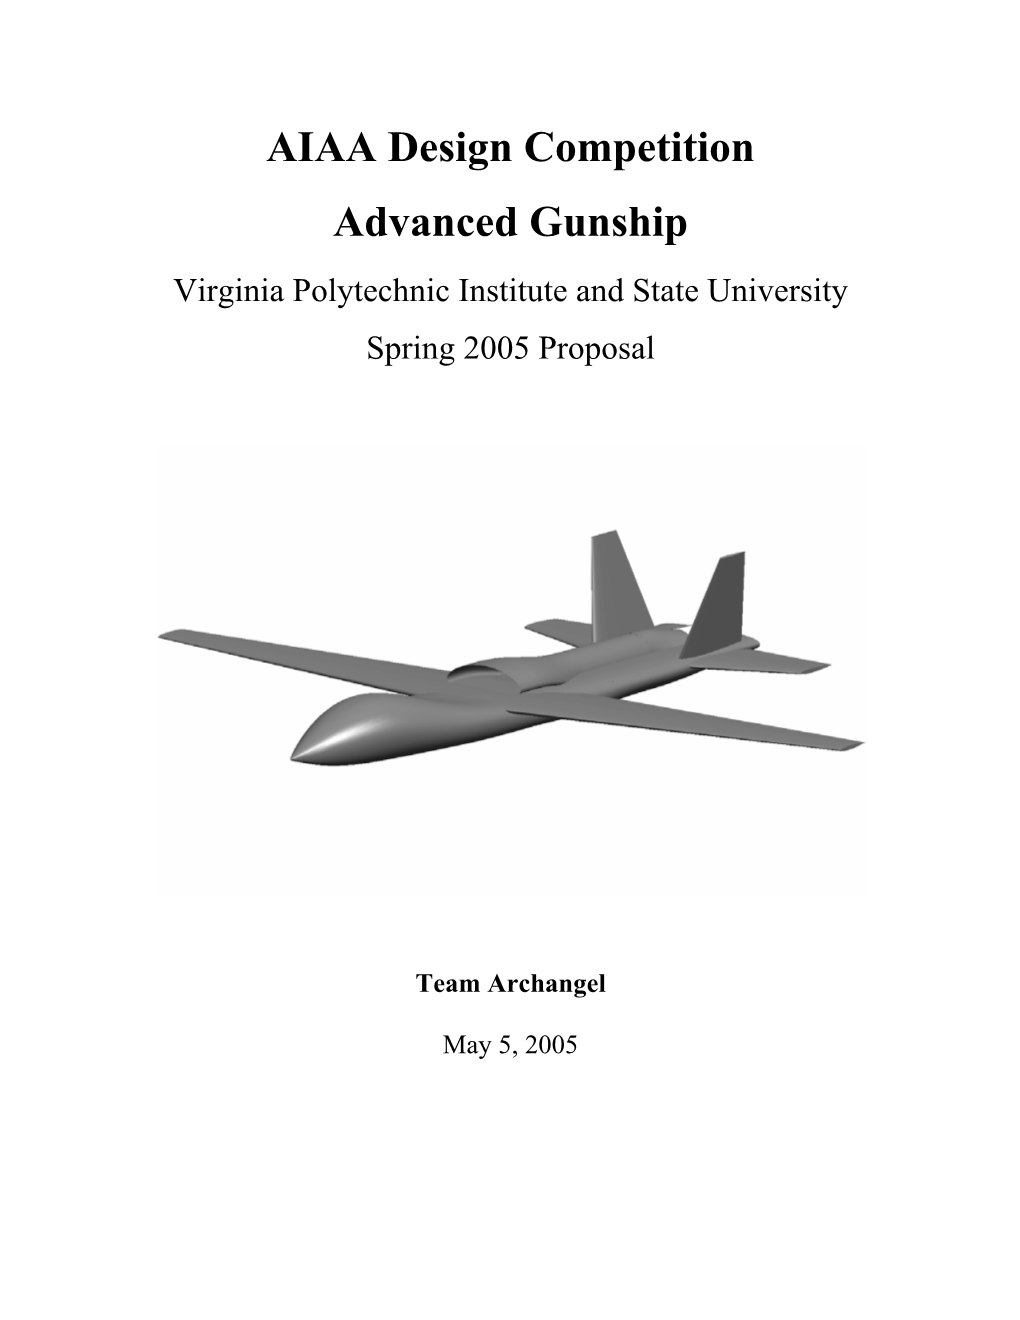 AIAA Design Competition Advanced Gunship Virginia Polytechnic Institute and State University Spring 2005 Proposal